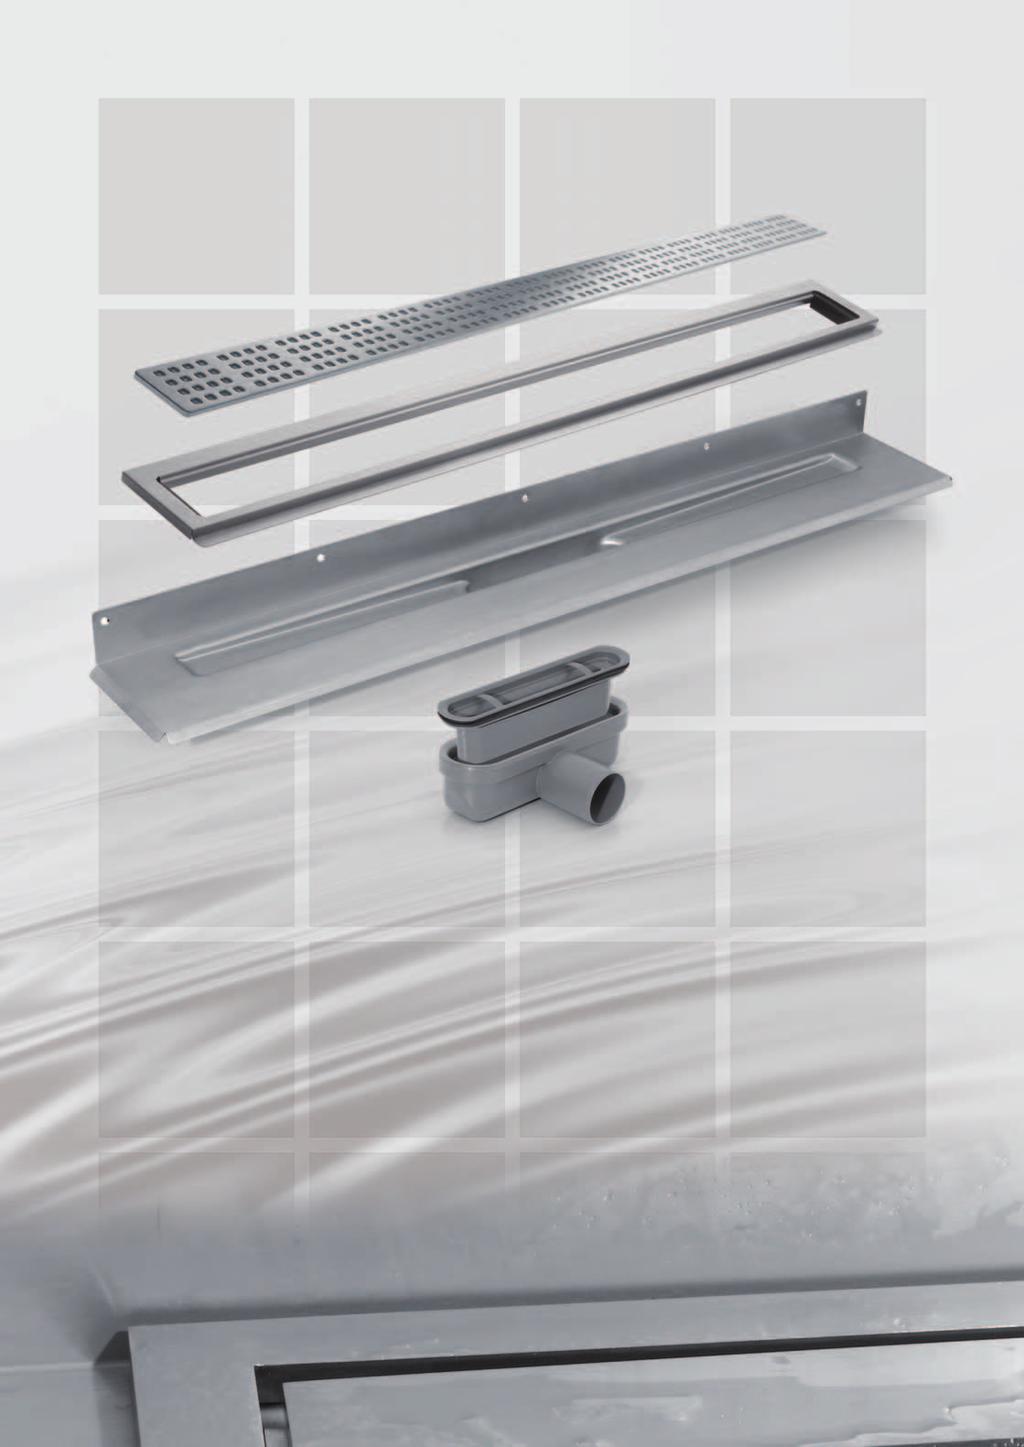 TI-LINE the Basic design 4 = 1 Unbeatable easy! The linear shower drainage system in the basic configuration it comes with the grate Square. 3 2 1 4 1.